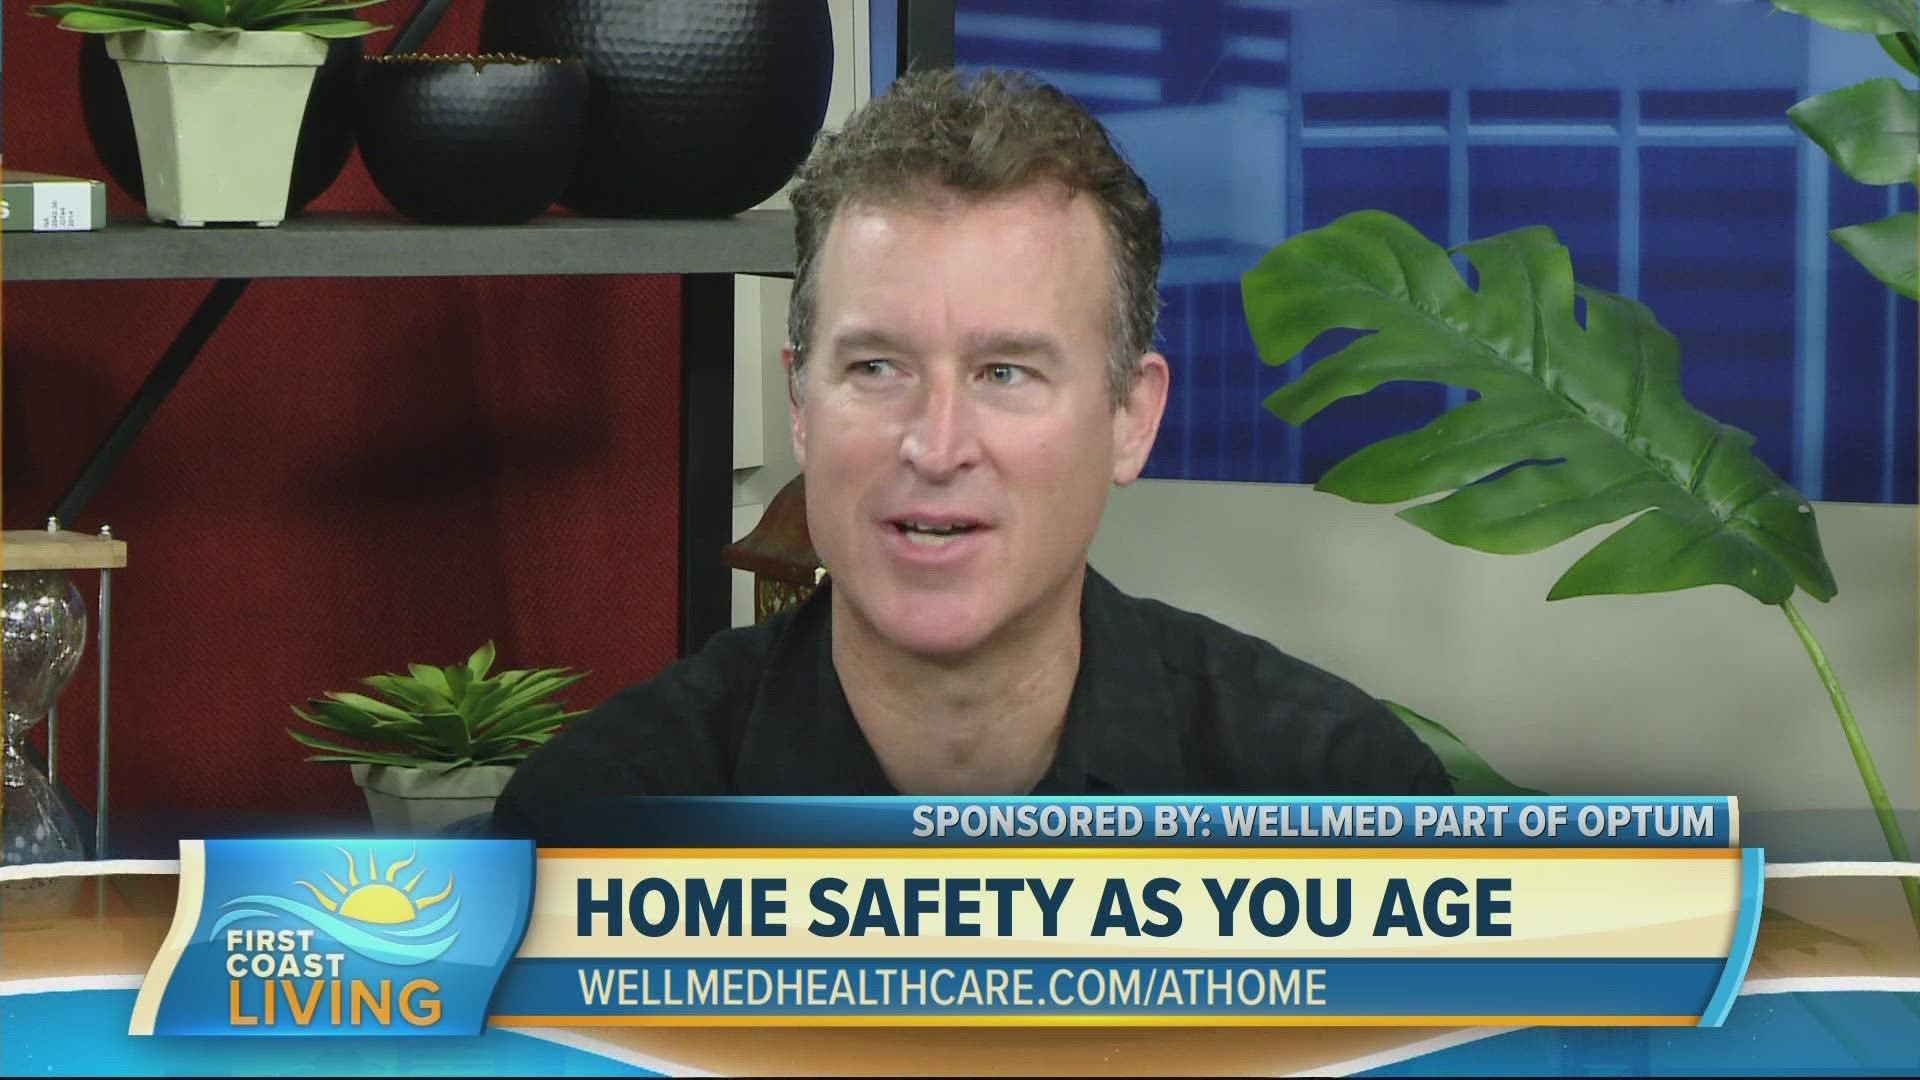 Dr. Kenneth Adams shares what health conditions can be managed at home and the important questions to ask your doctor.